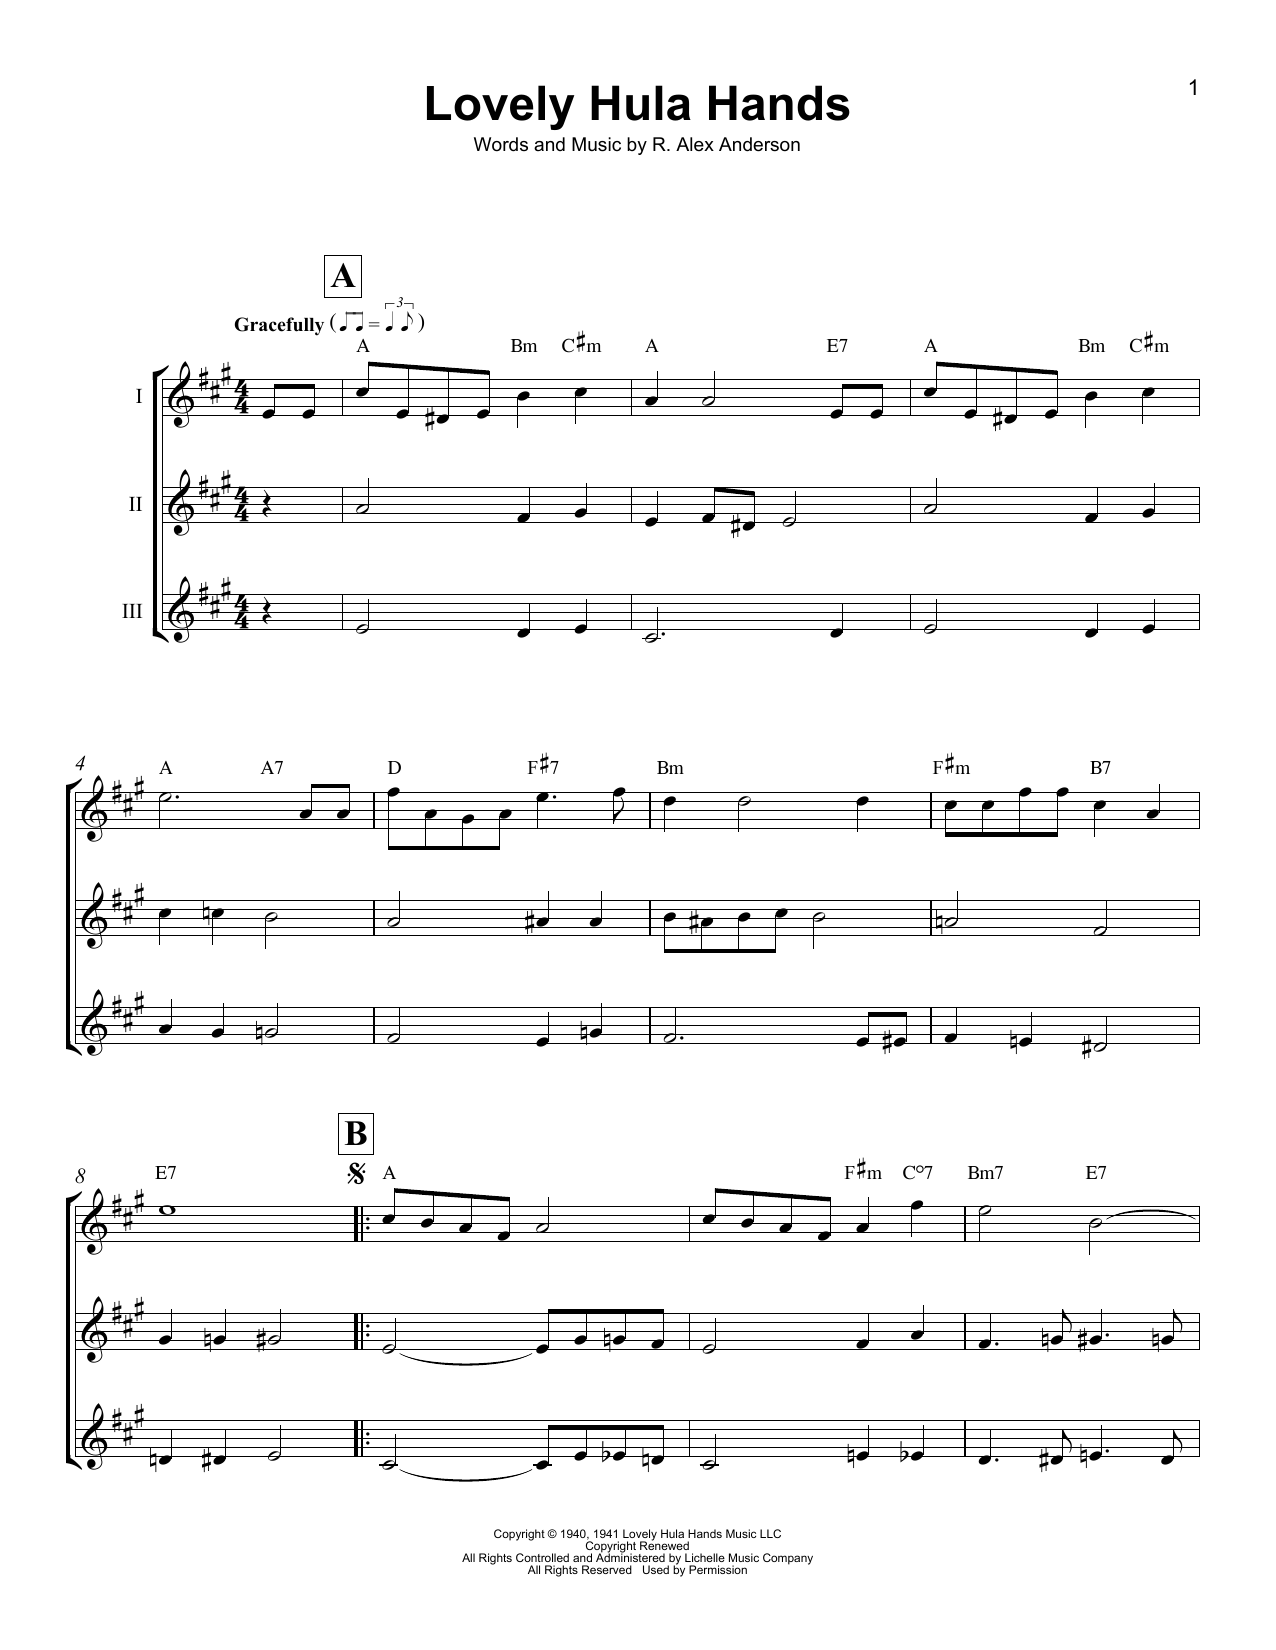 Download R. Alex Anderson Lovely Hula Hands Sheet Music